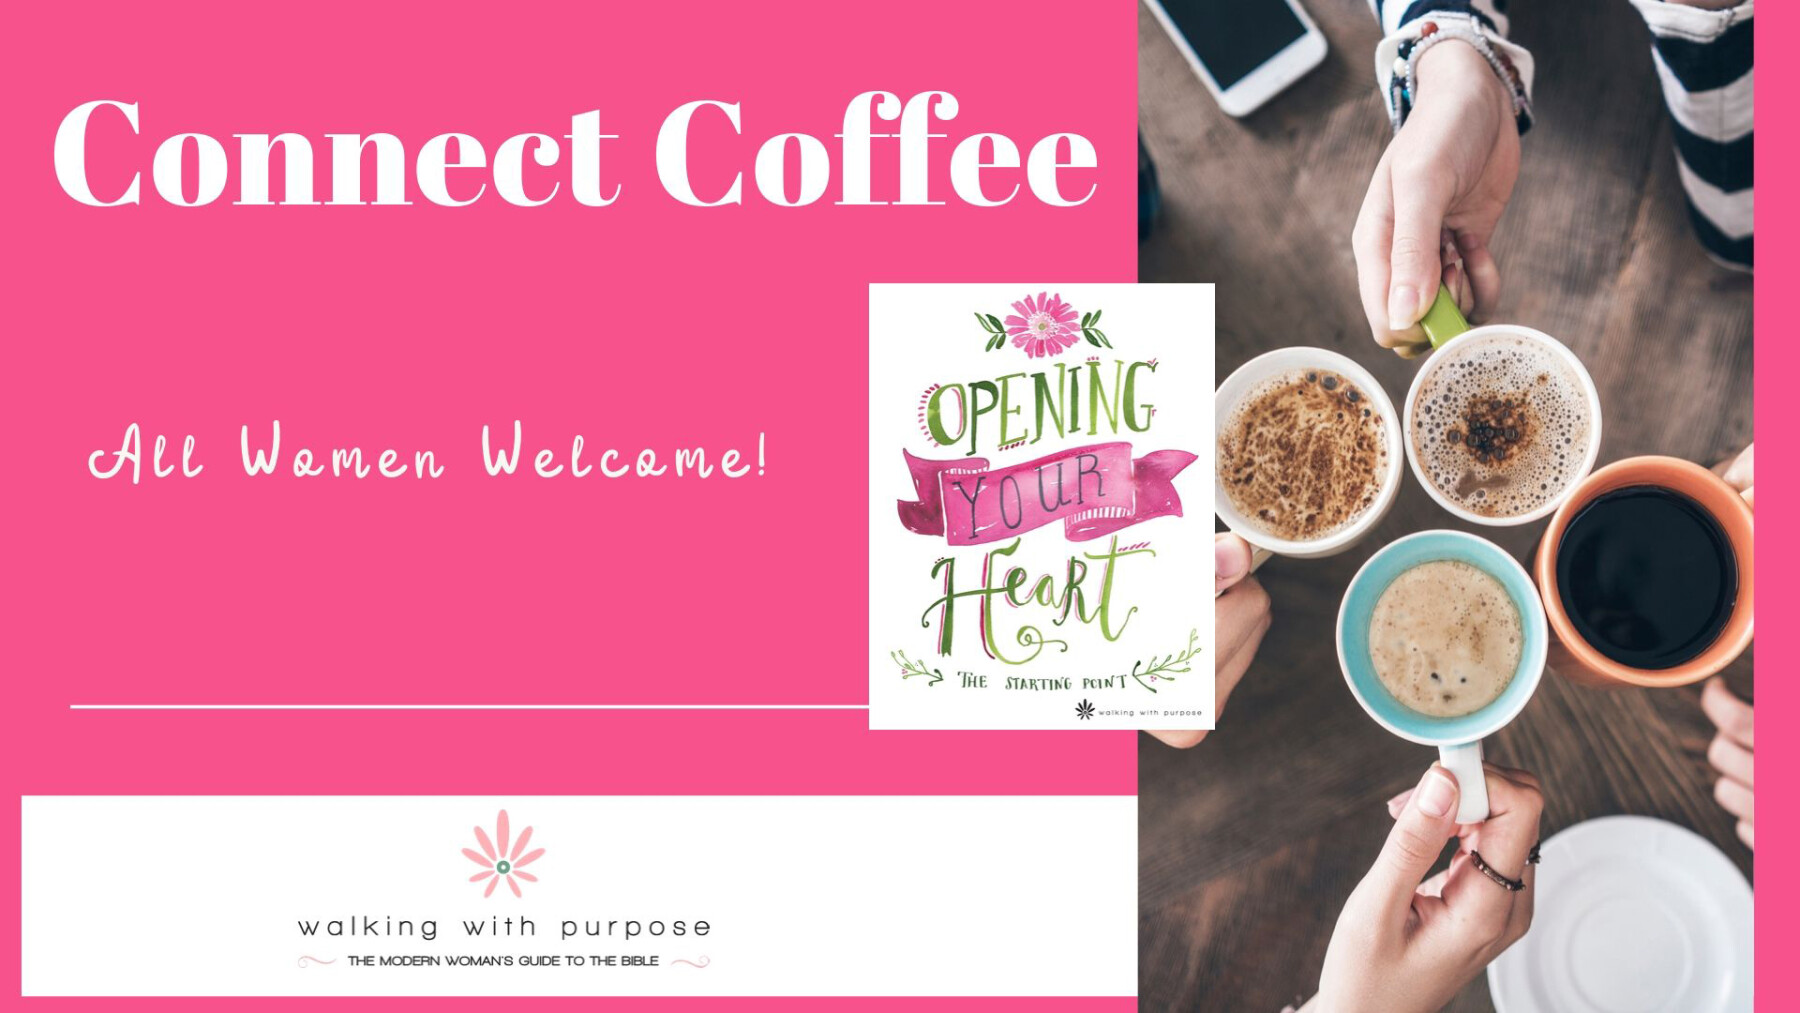 Connect Coffee - Opening Your Heart